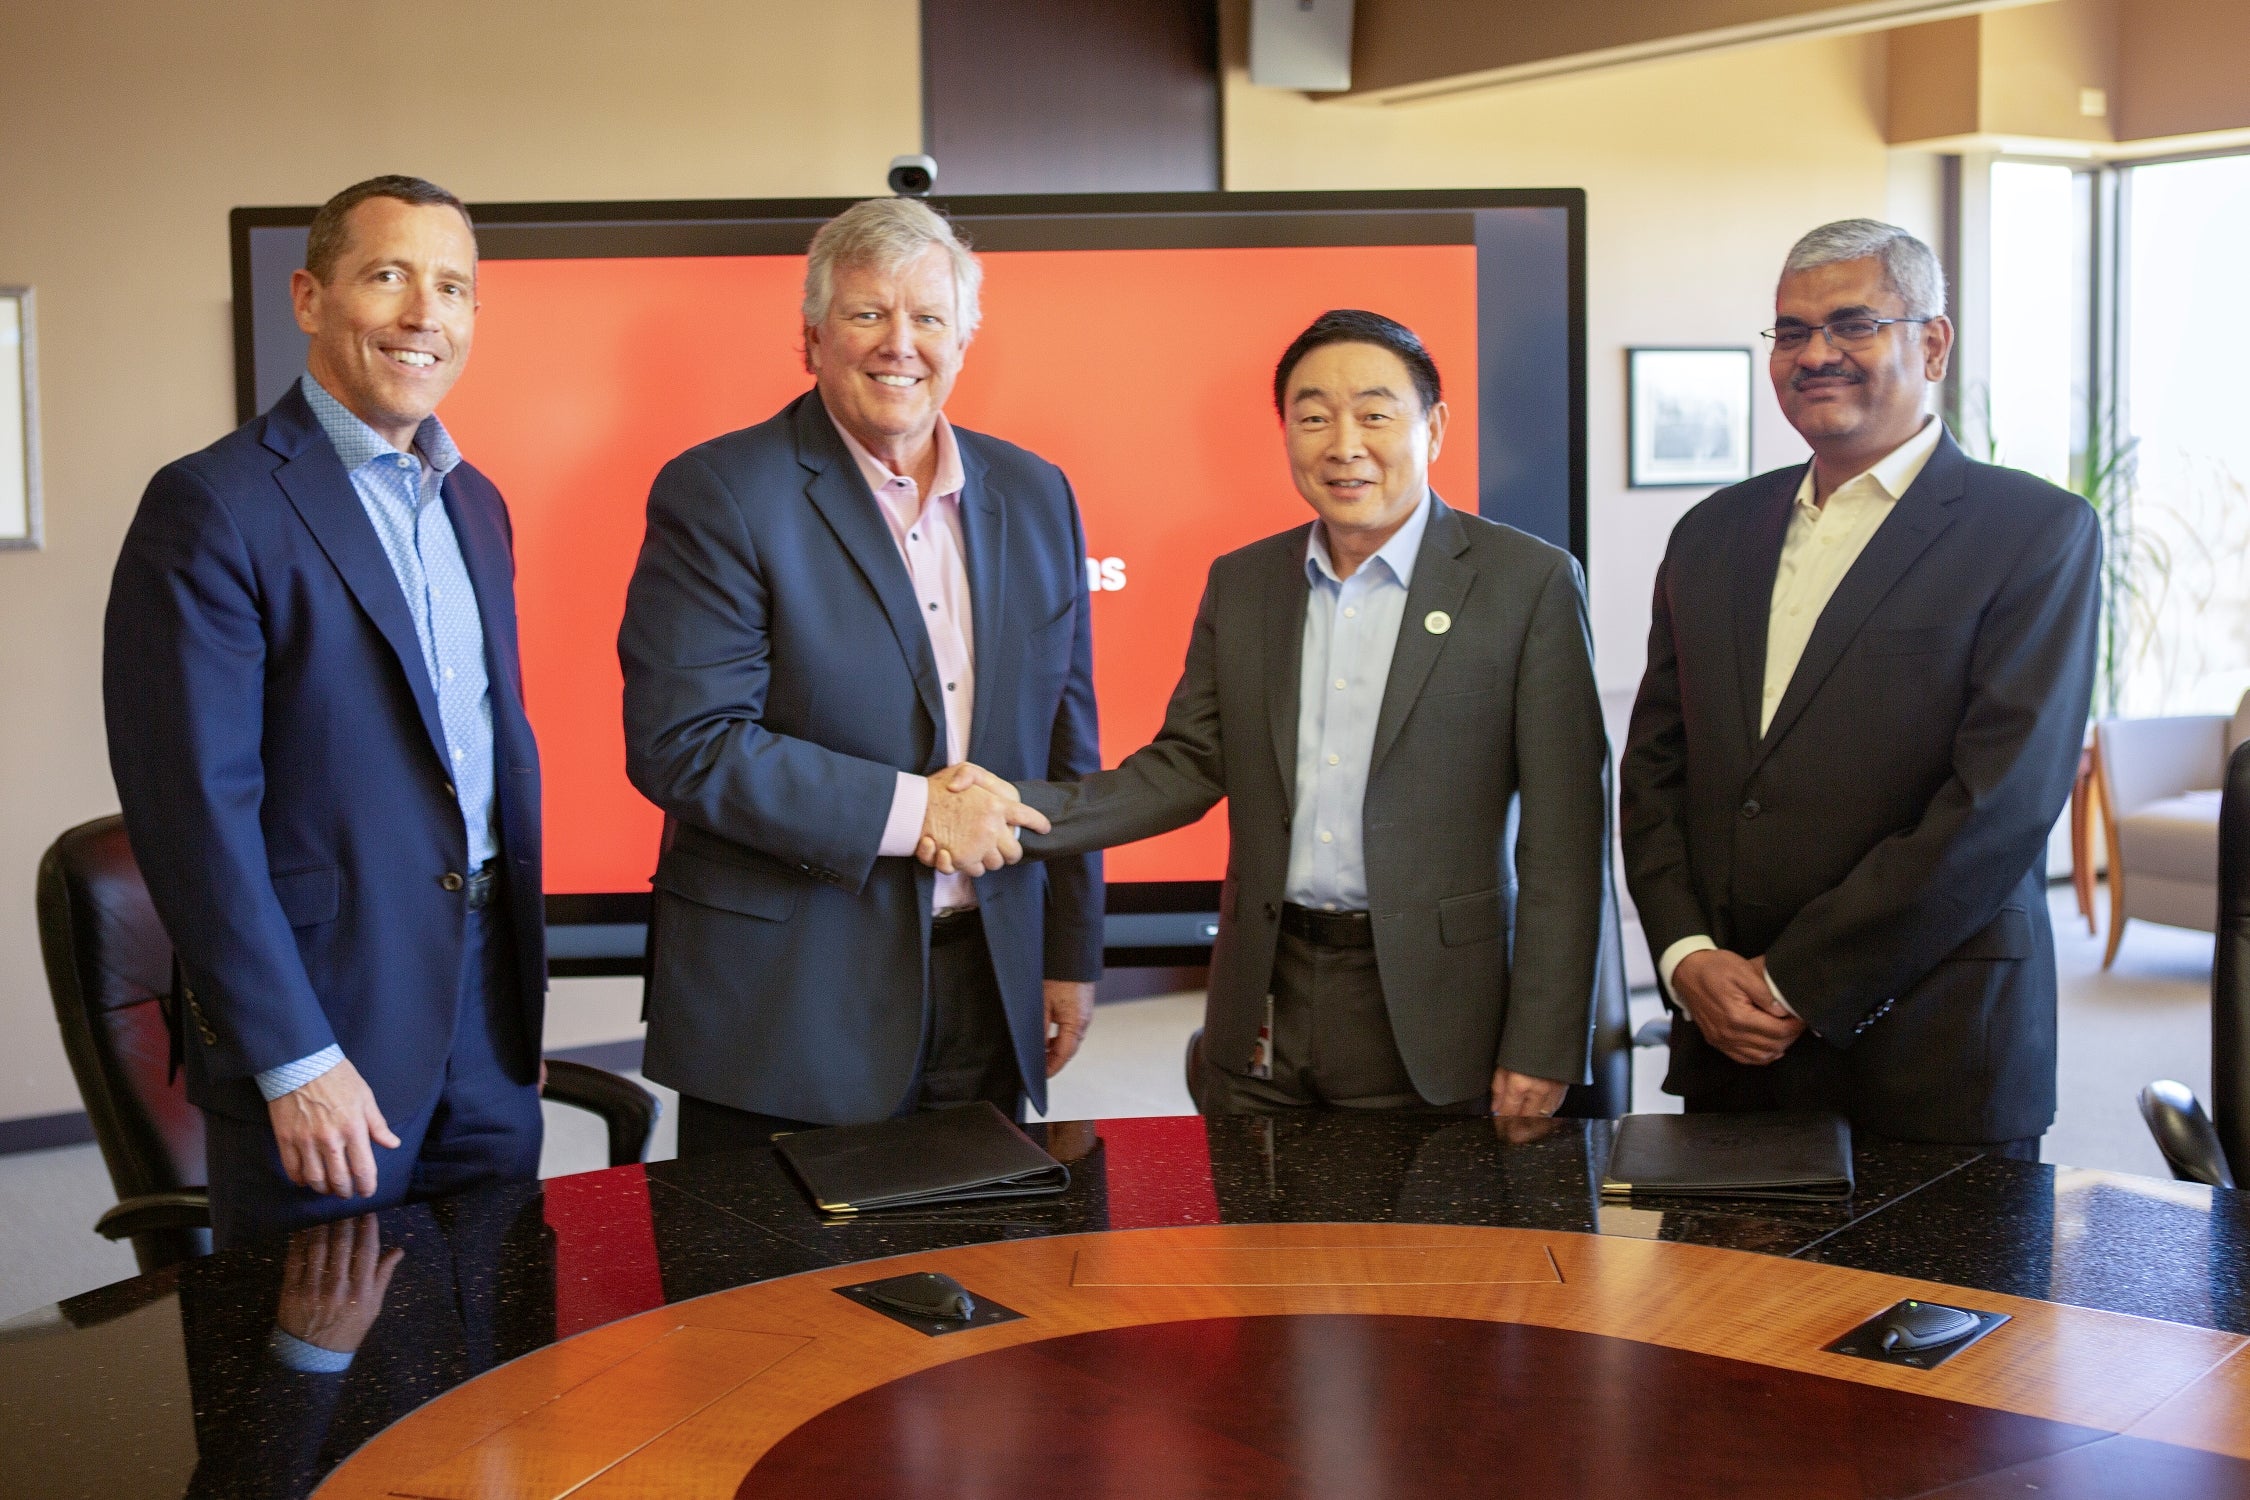 At a ceremony at UL Solutions headquarters in Northbrook, Illinois, Dave Hopping, global CEO of smart infrastructure solutions and services at Siemens, and Weifang Zhou, executive vice president and president of Testing, Inspection and Certification at UL Solutions, shake hands after signing an agreement to collaborate on smart building assessments through the SPIRE qualification program.